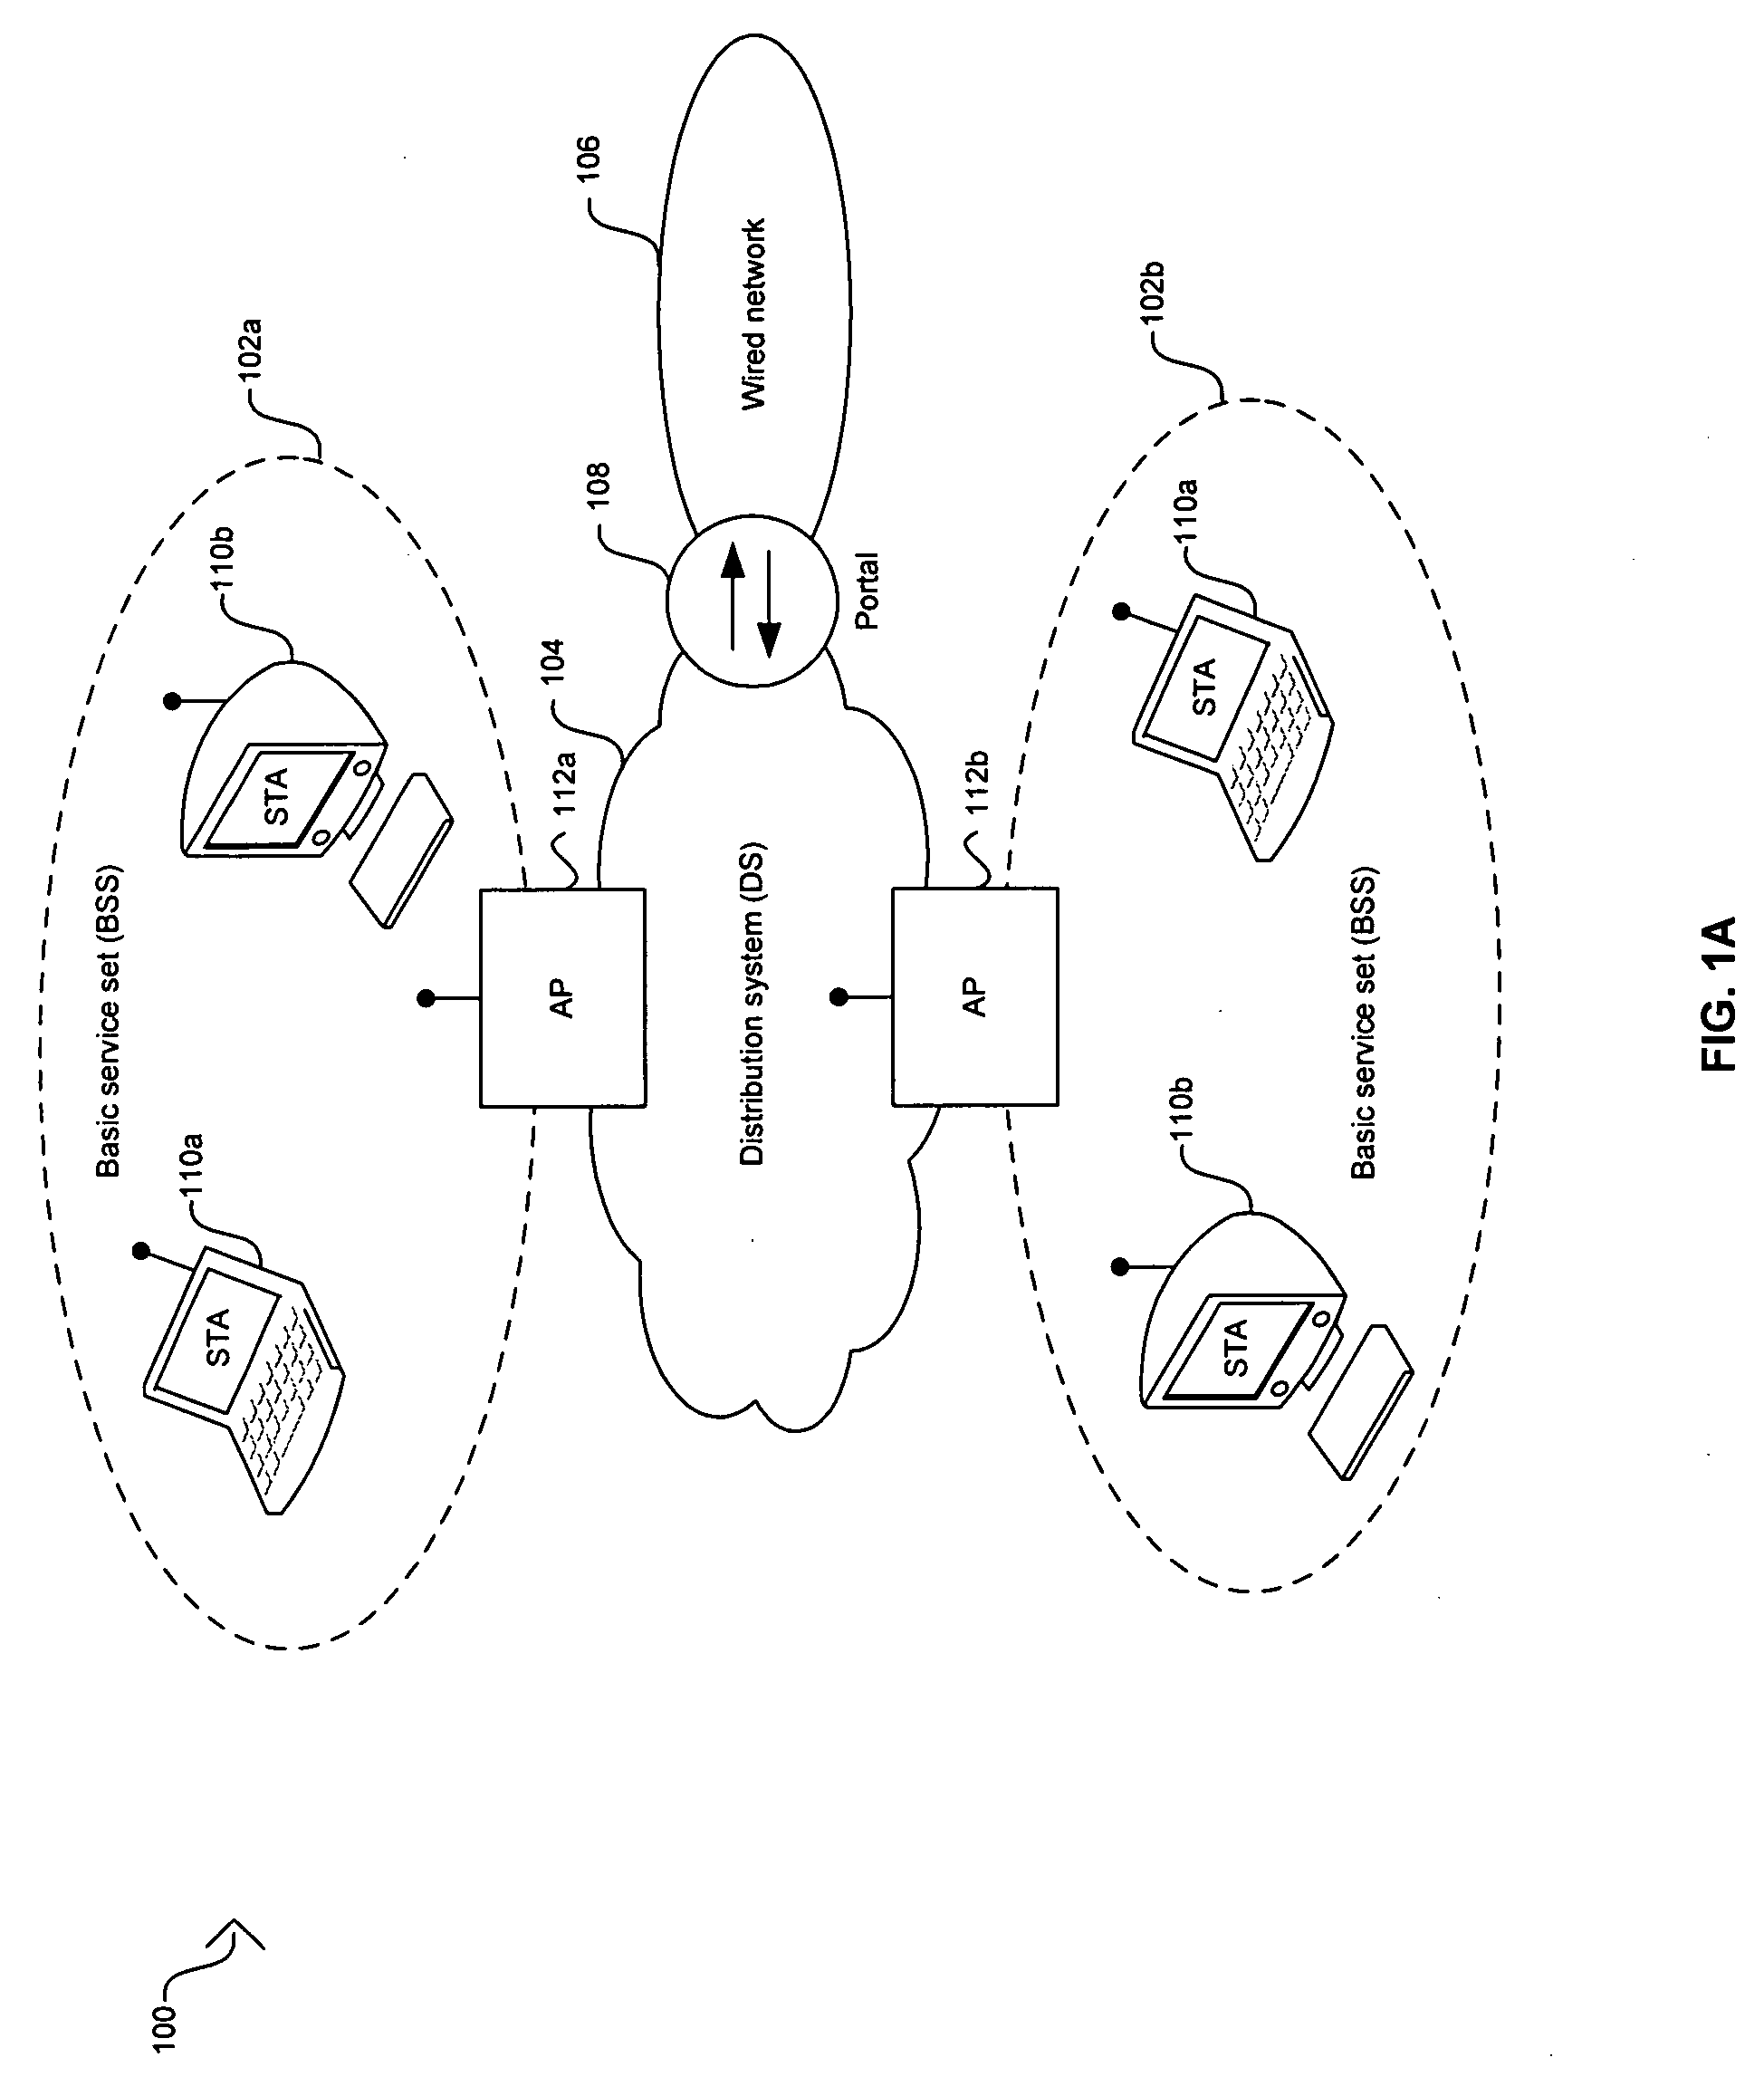 Method and apparatus for enabling simultaneous VoWLAN and Bluetooth audio in small form factor handheld devices